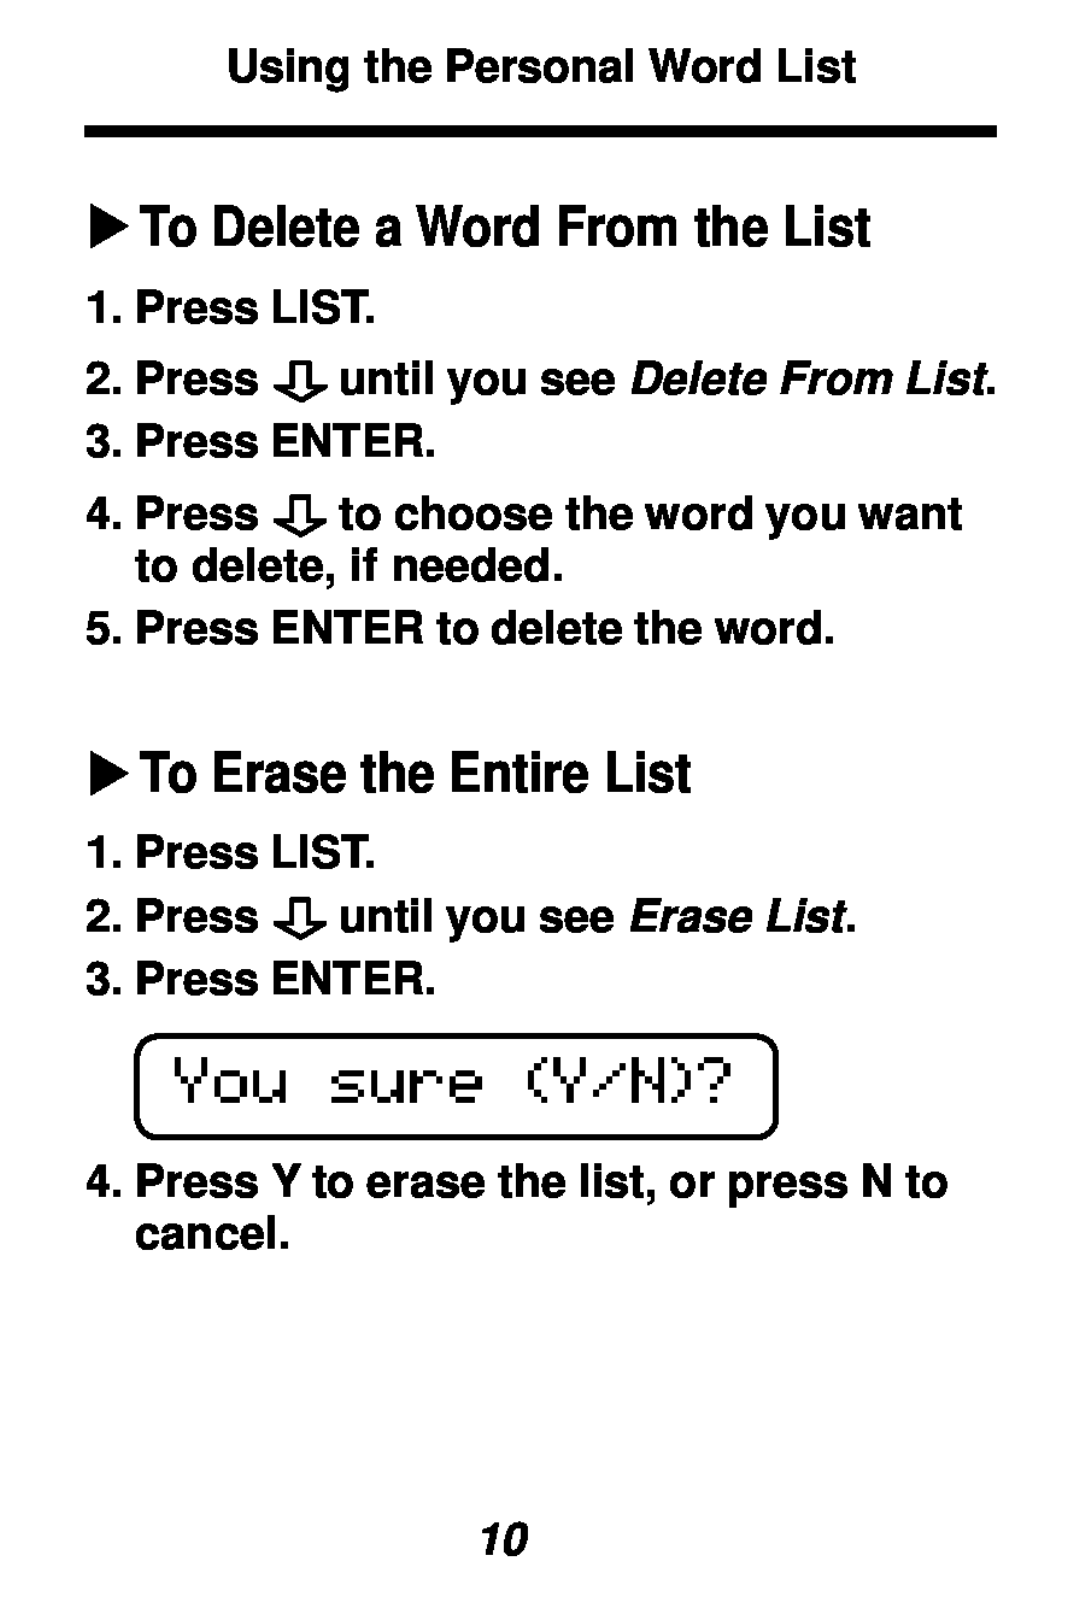 Franklin SA-98 manual To Delete a Word From the List, To Erase the Entire List, Using the Personal Word List, Press LIST 